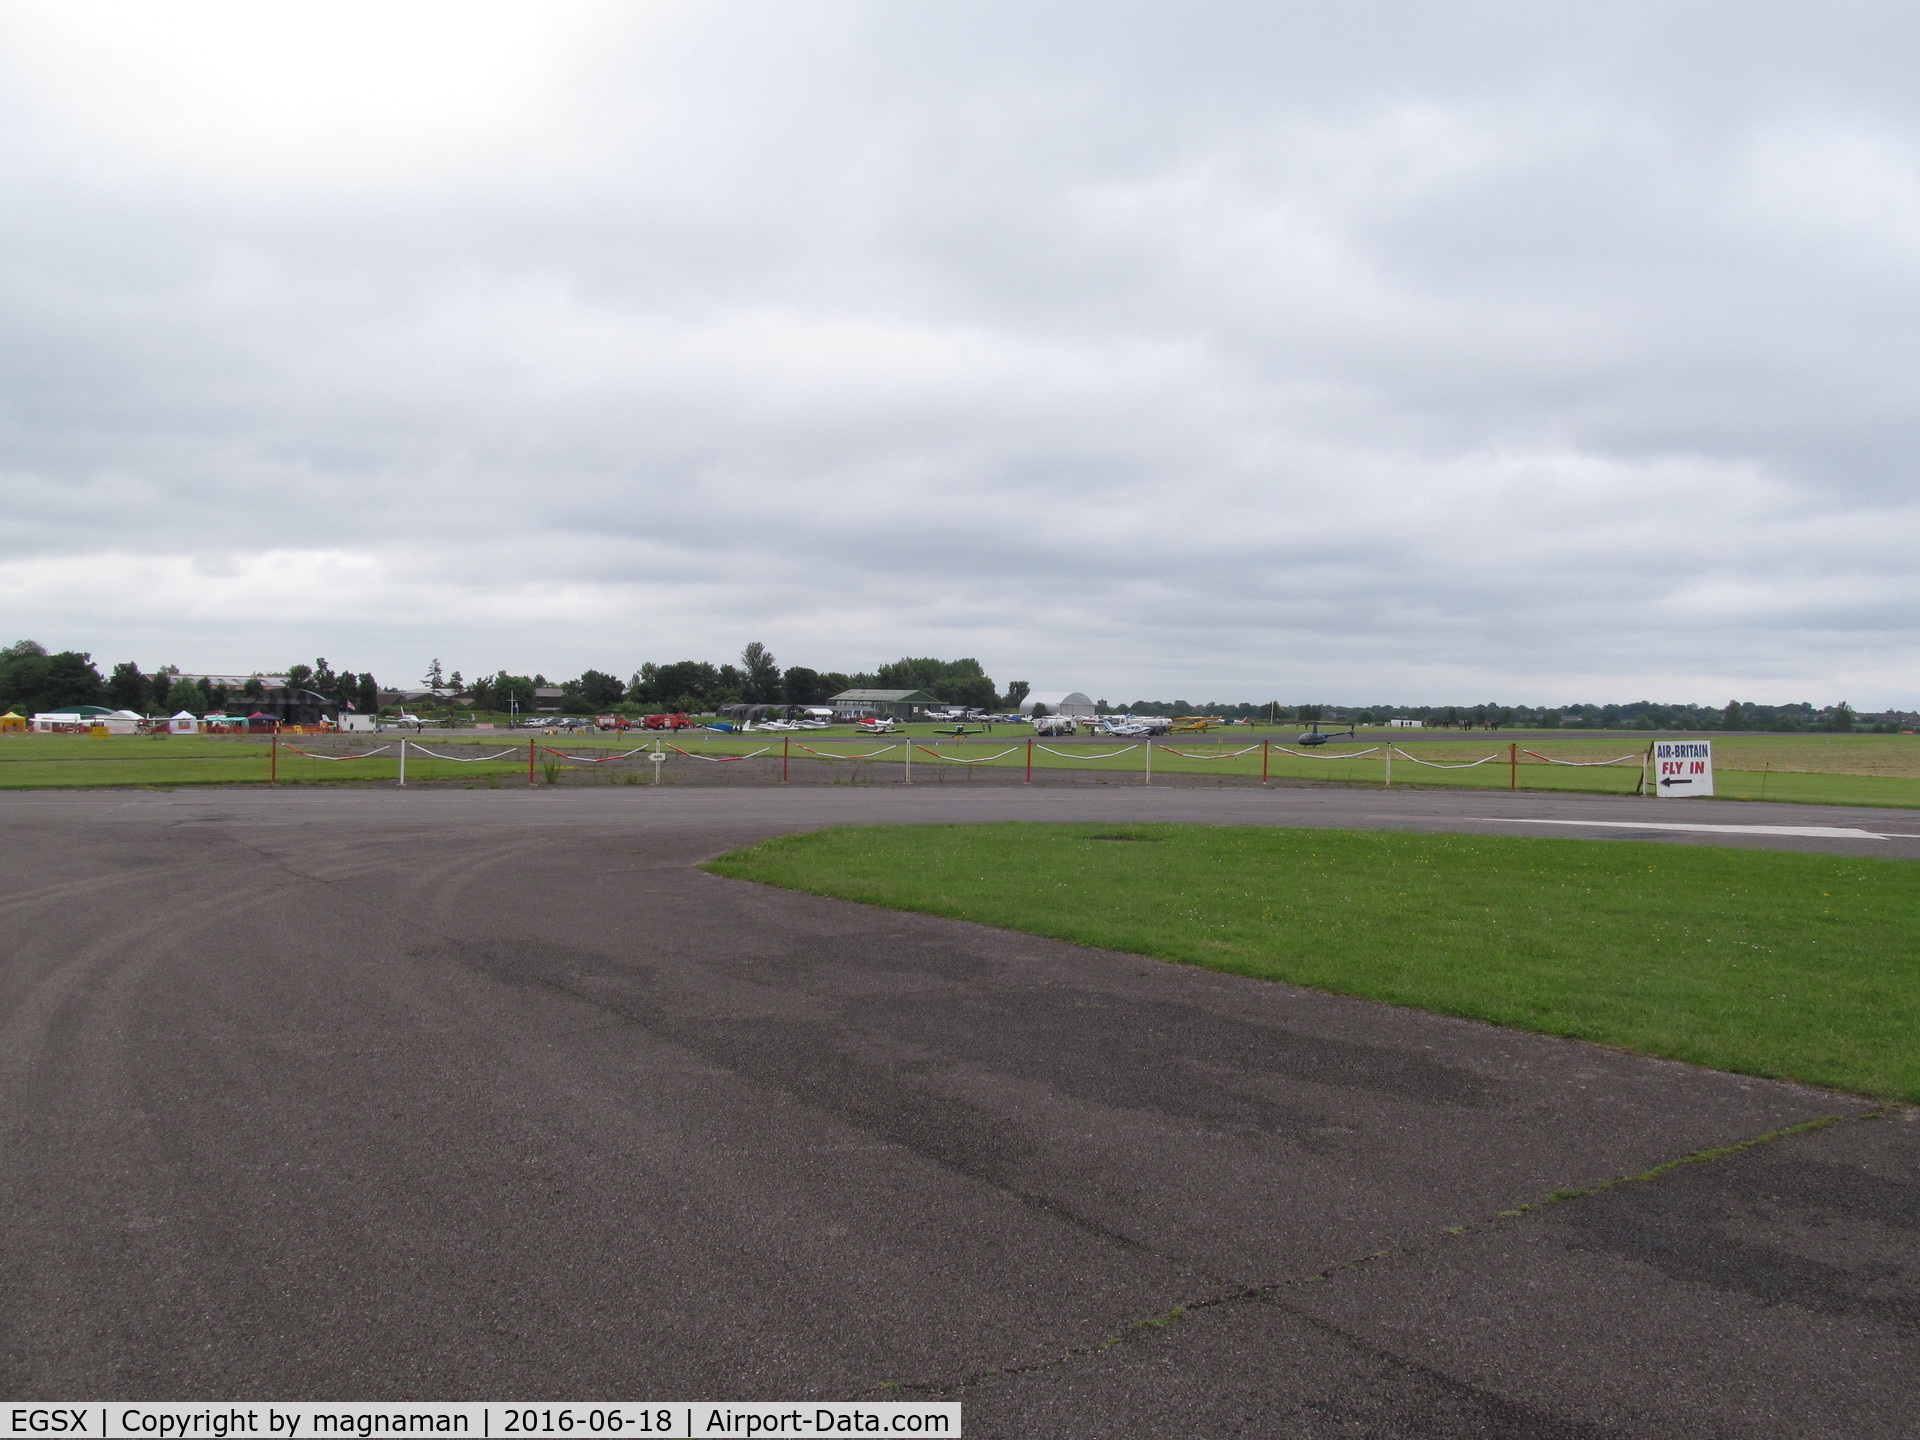 North Weald Airfield Airport, North Weald, England United Kingdom (EGSX) - entry to 2016 fly in